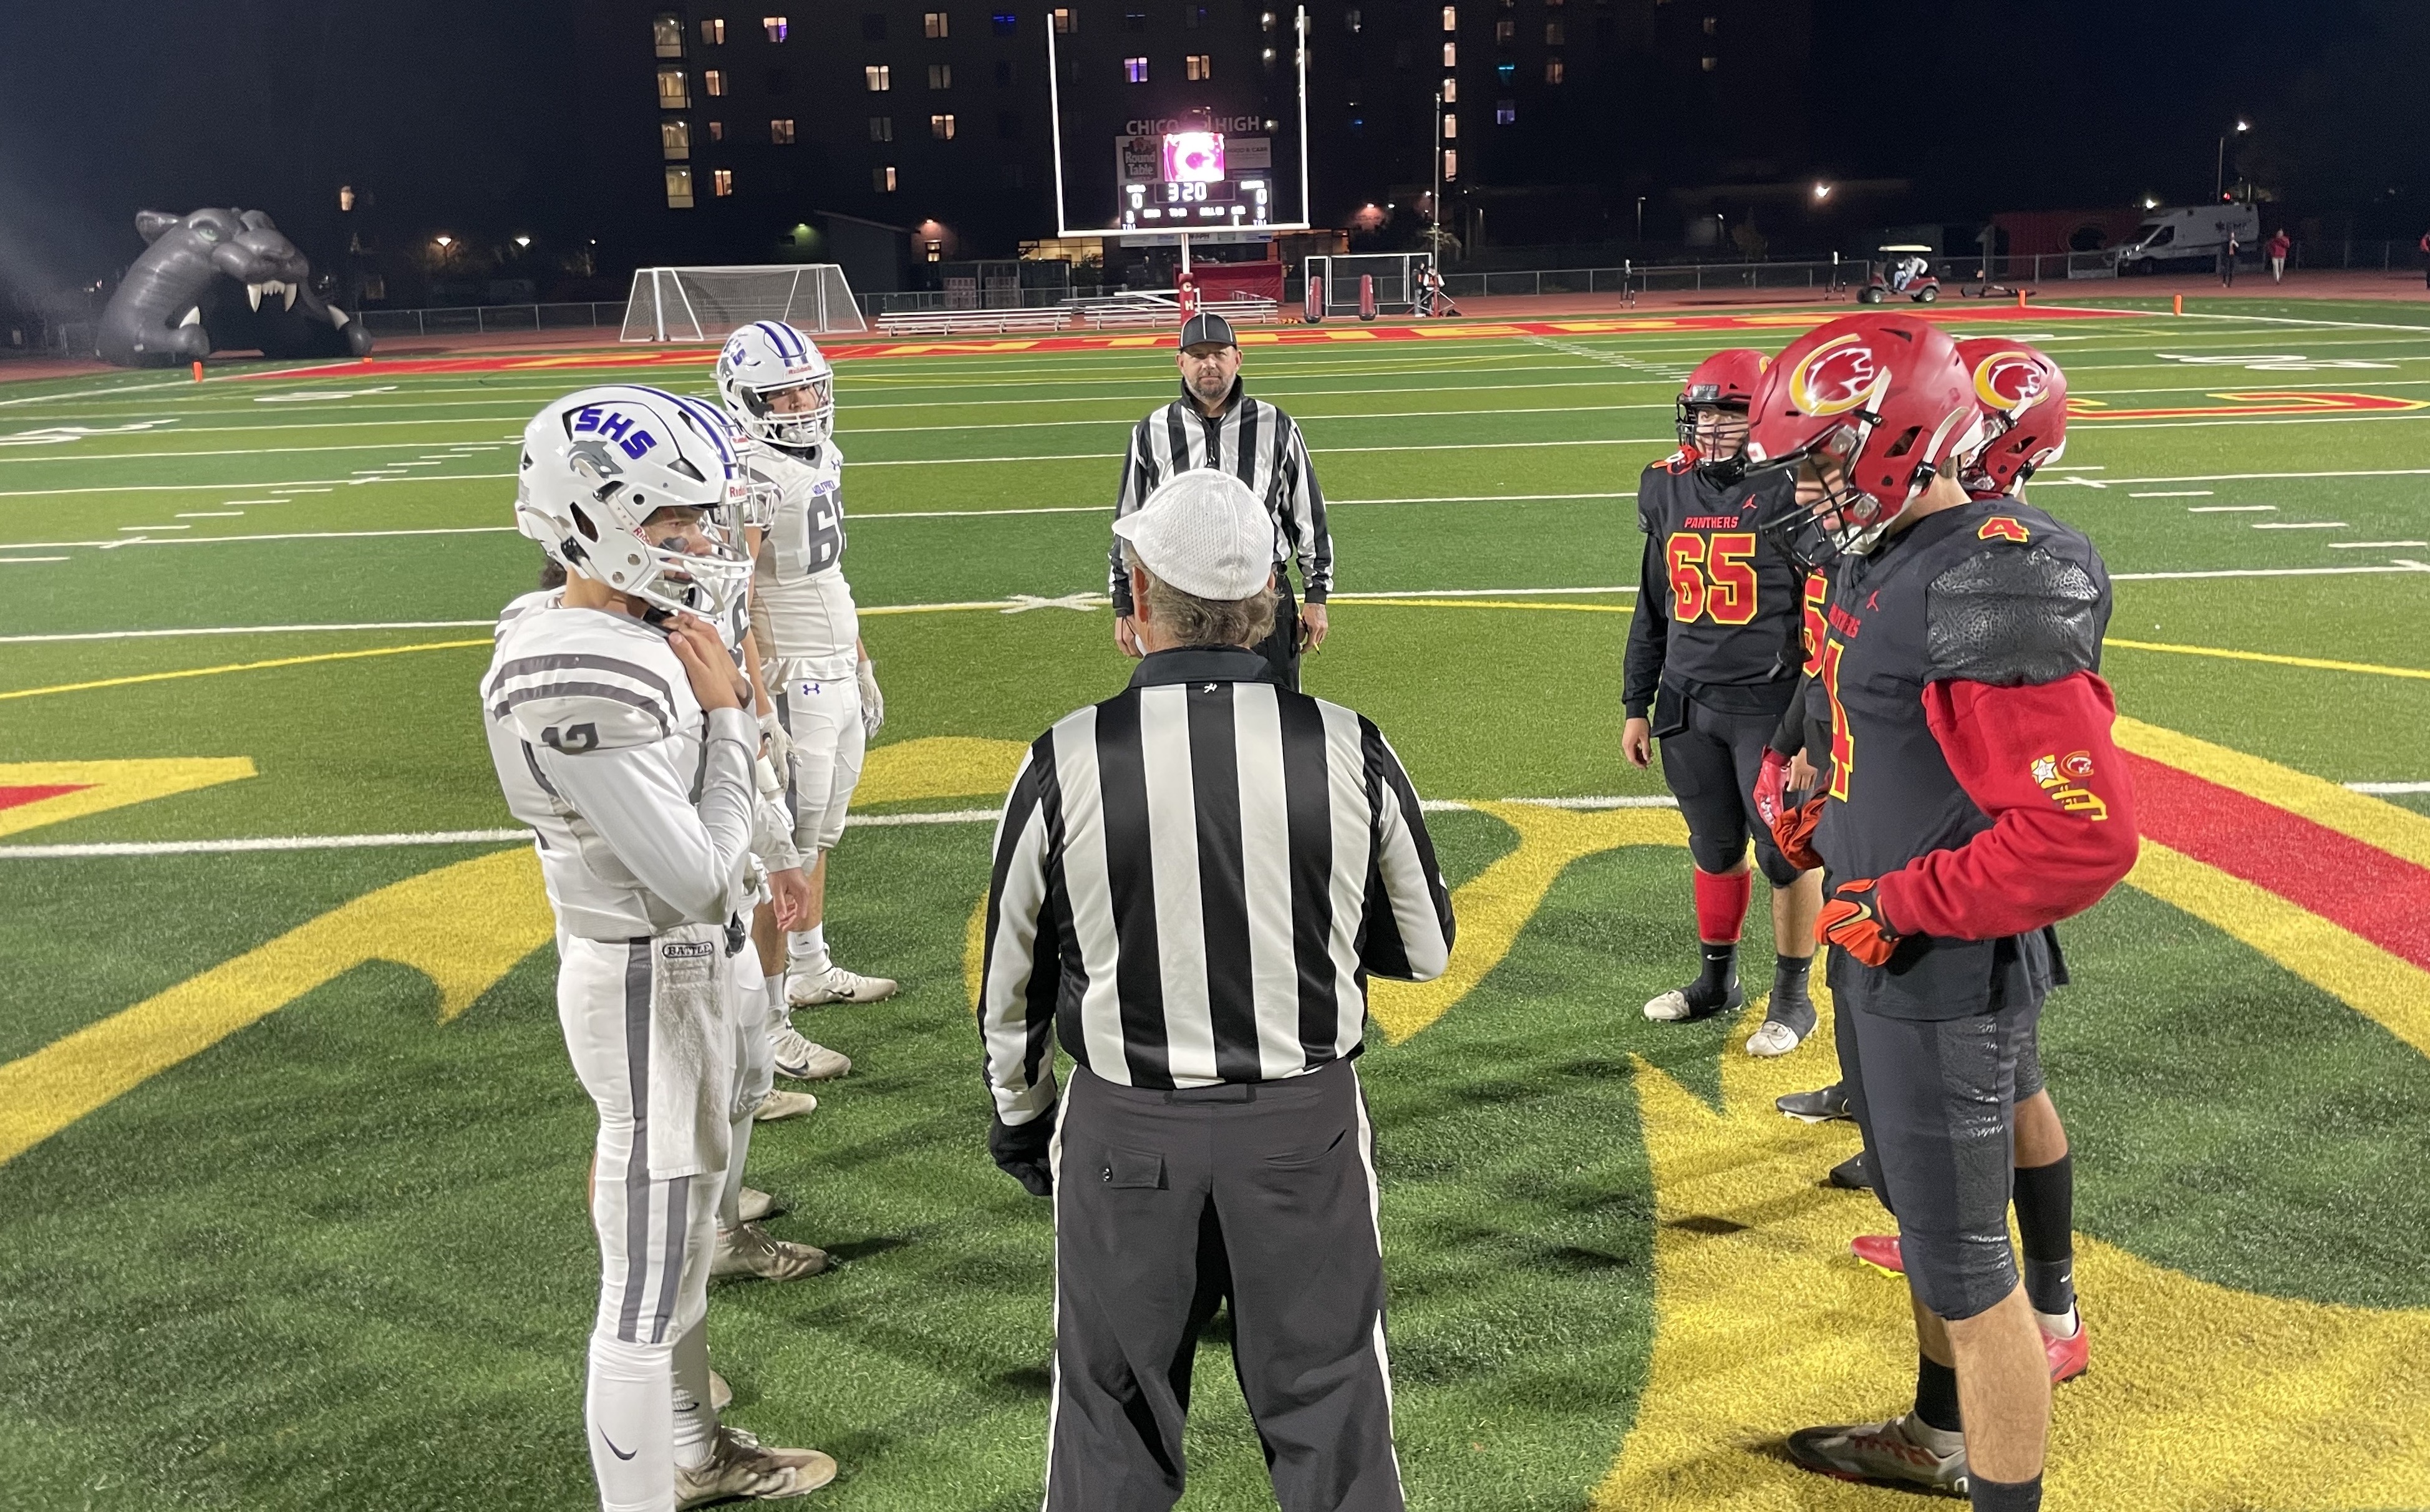 Chico defeated Shasta 14-7 on November 10, 2022 to advance to the CIF Northern Section state semifinals.